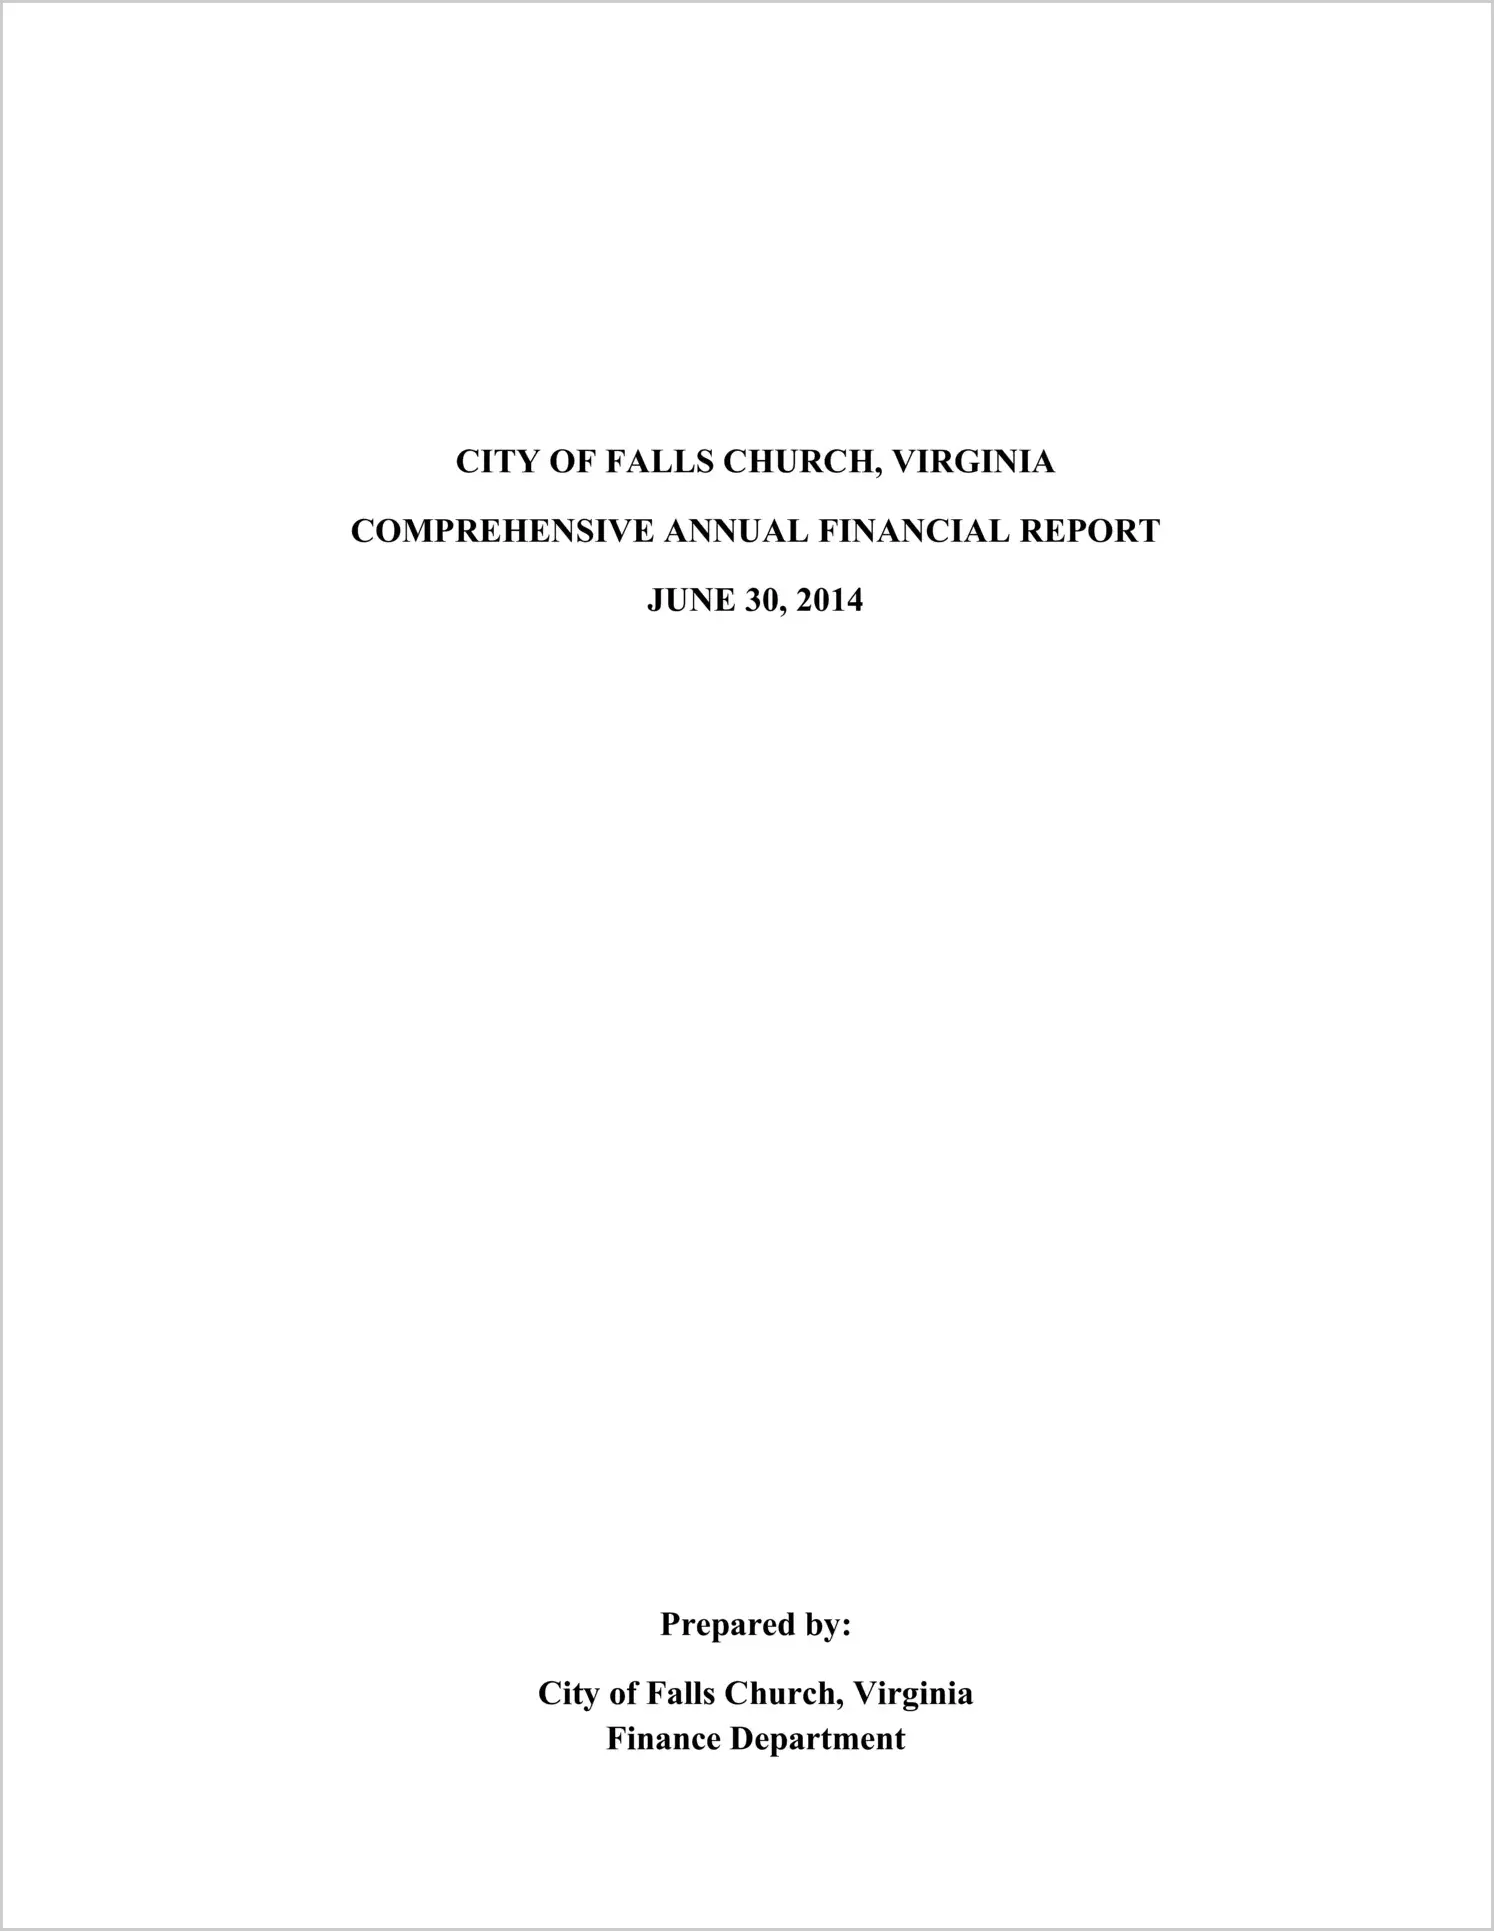 2014 Annual Financial Report for City of Falls Church